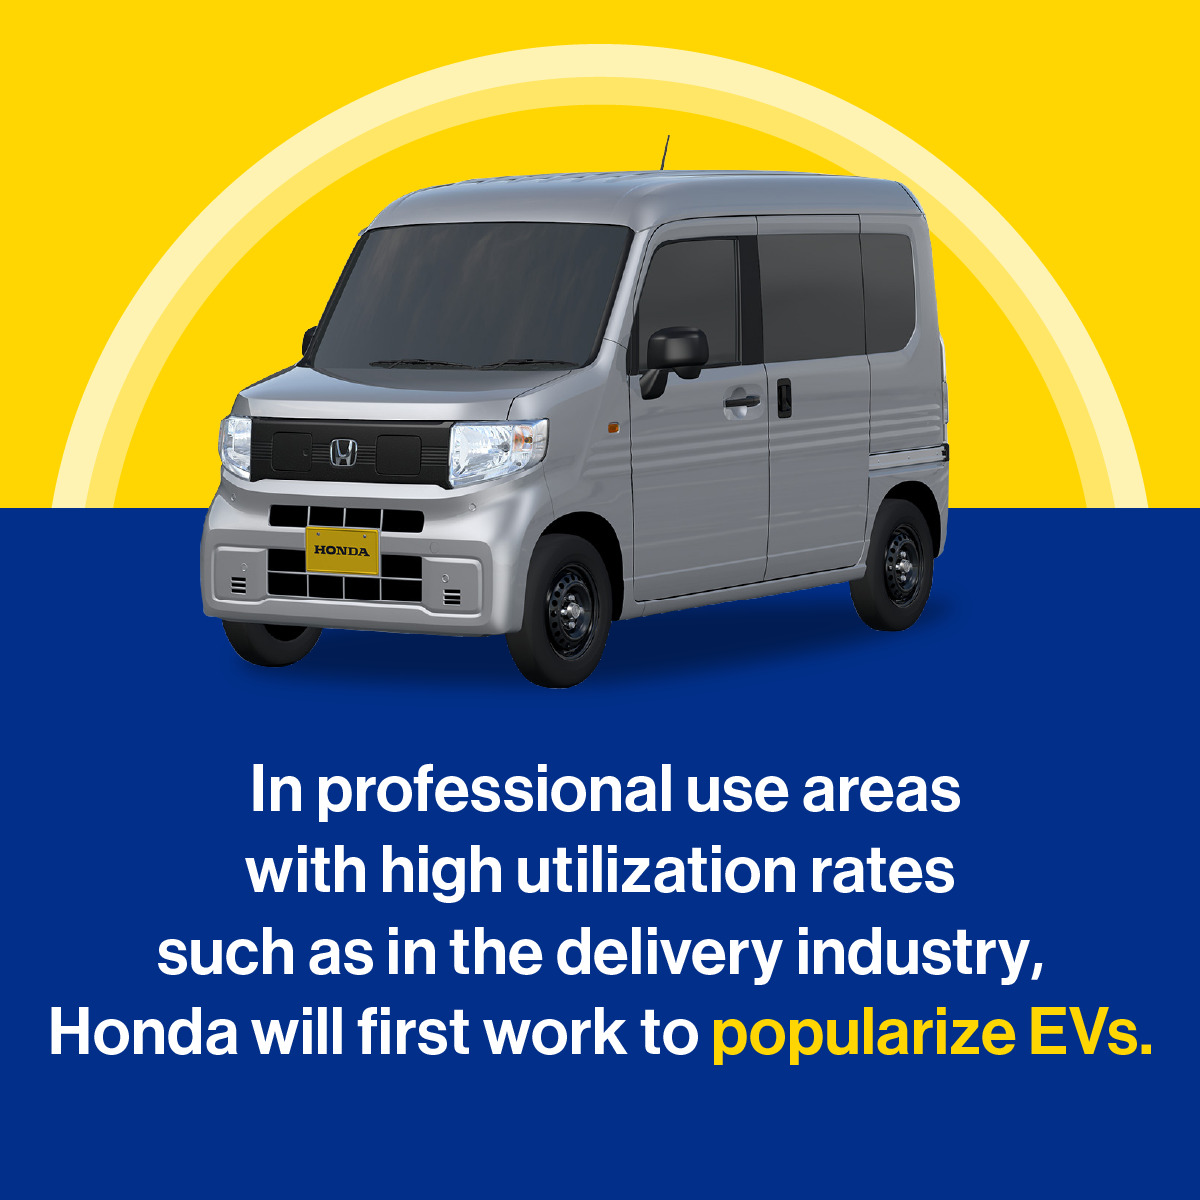 In Japan, from professional use areas, Honda will first work to popularize EVs